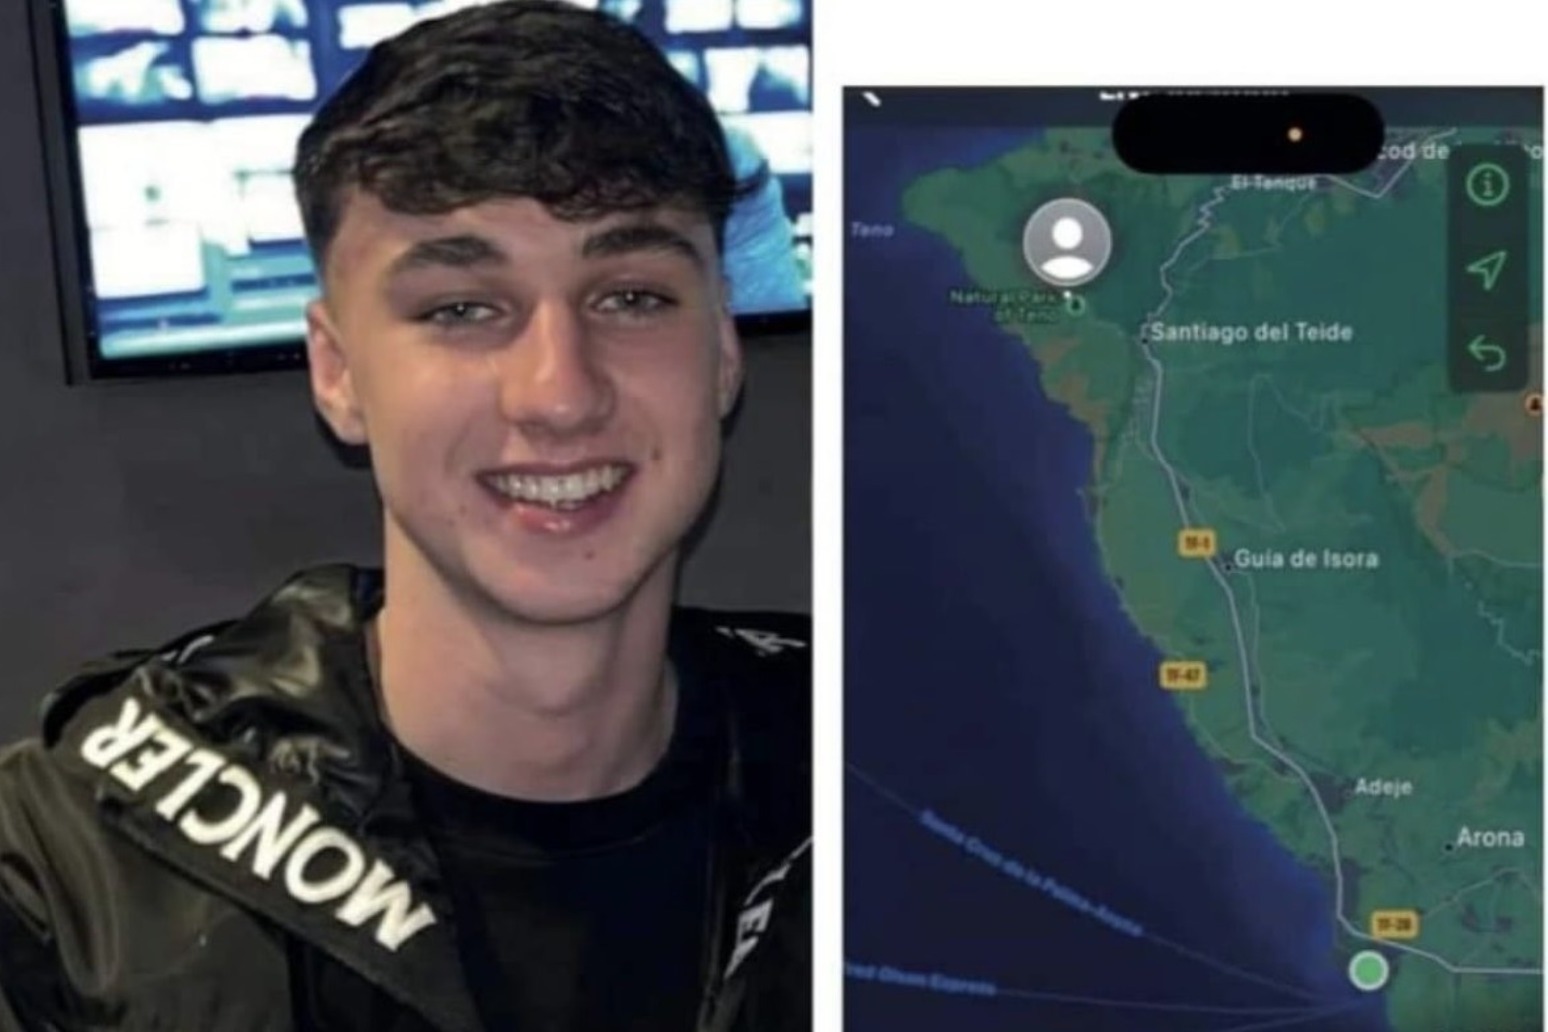 Mother of British teenager missing in Tenerife says search is ‘living nightmare’ 